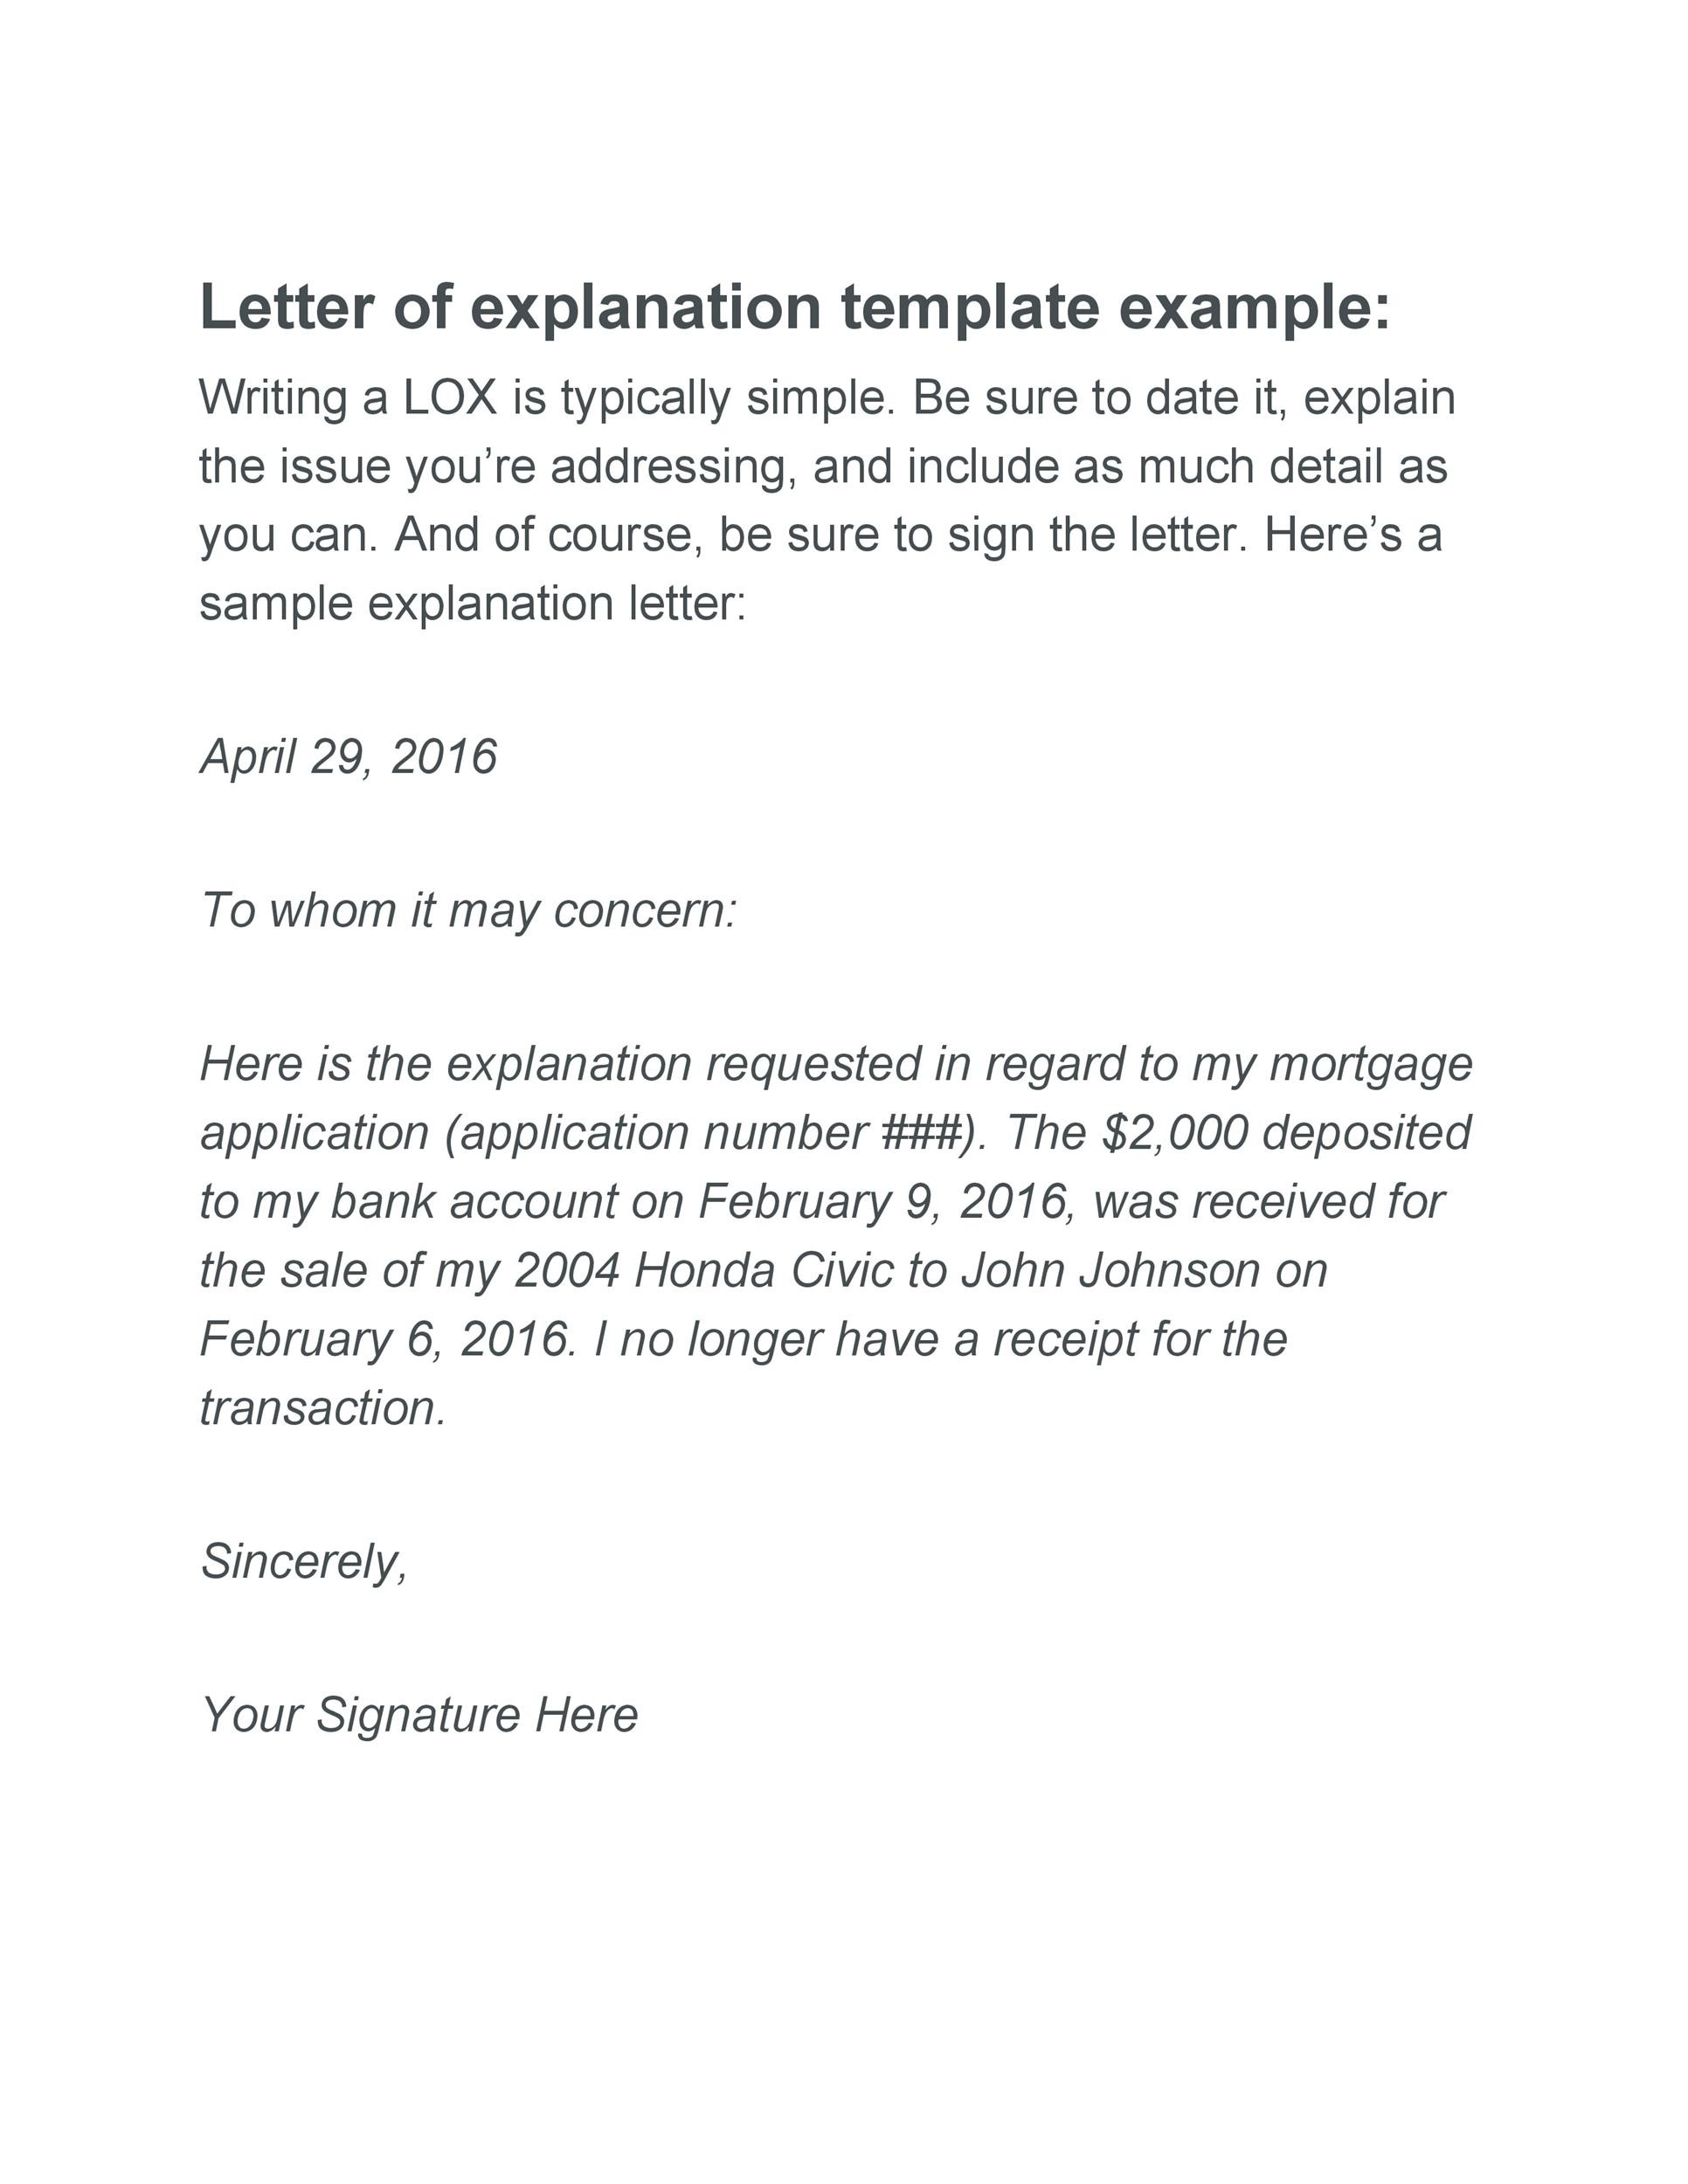 10 Letters Of Explanation Templates (Mortgage, Derogatory Credit) With Regard To Letter Of Explanation For Mortgage Large Deposit Throughout Letter Of Explanation For Mortgage Large Deposit